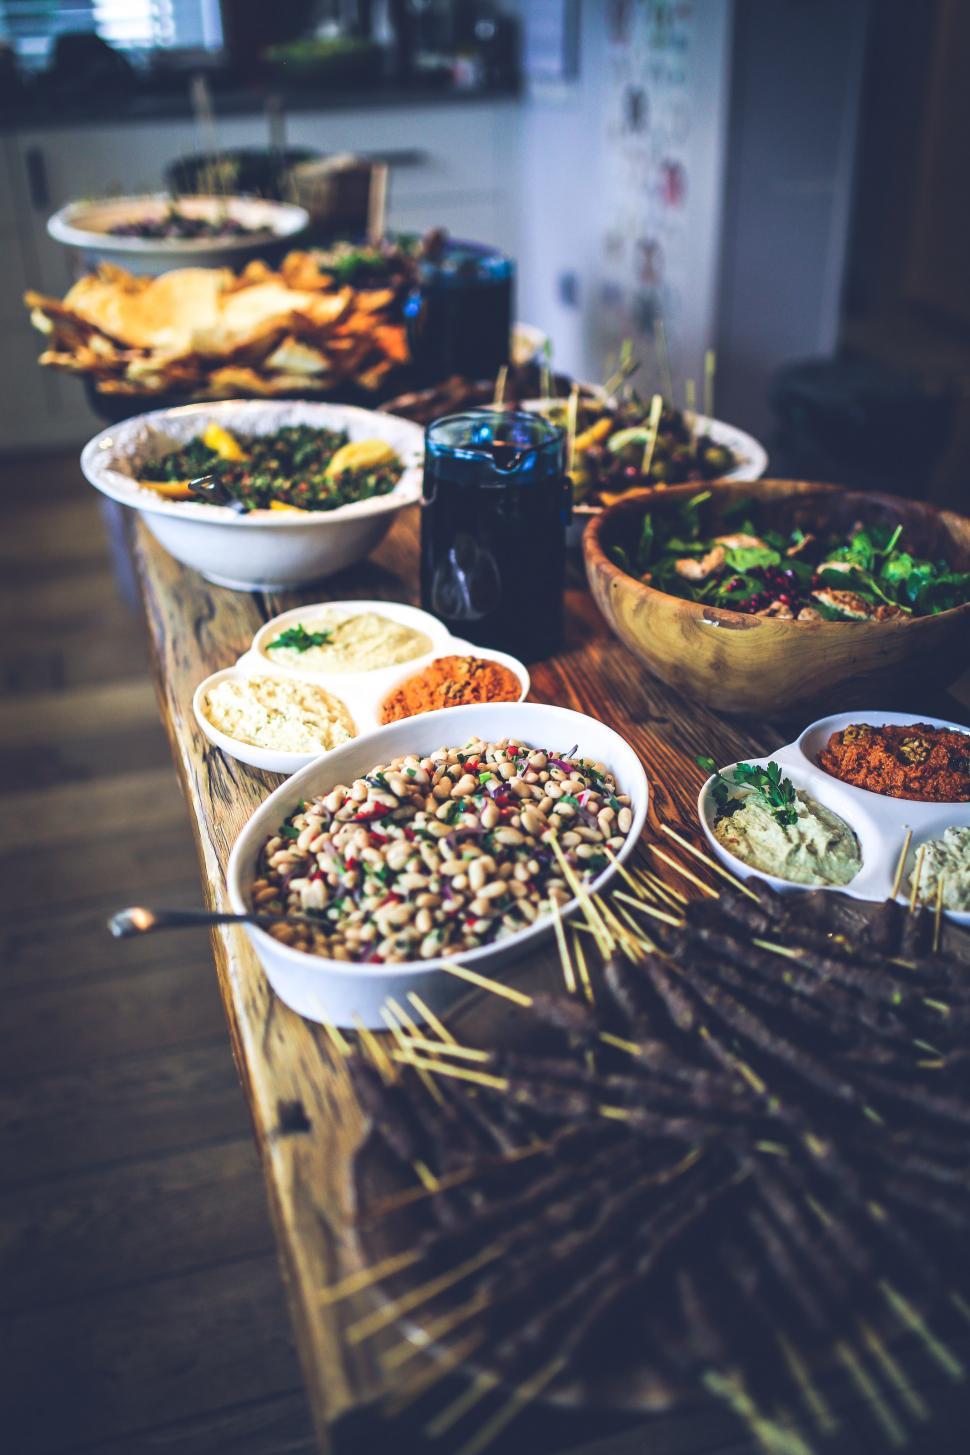 Free Image of Wooden Table With Bowls of Food 